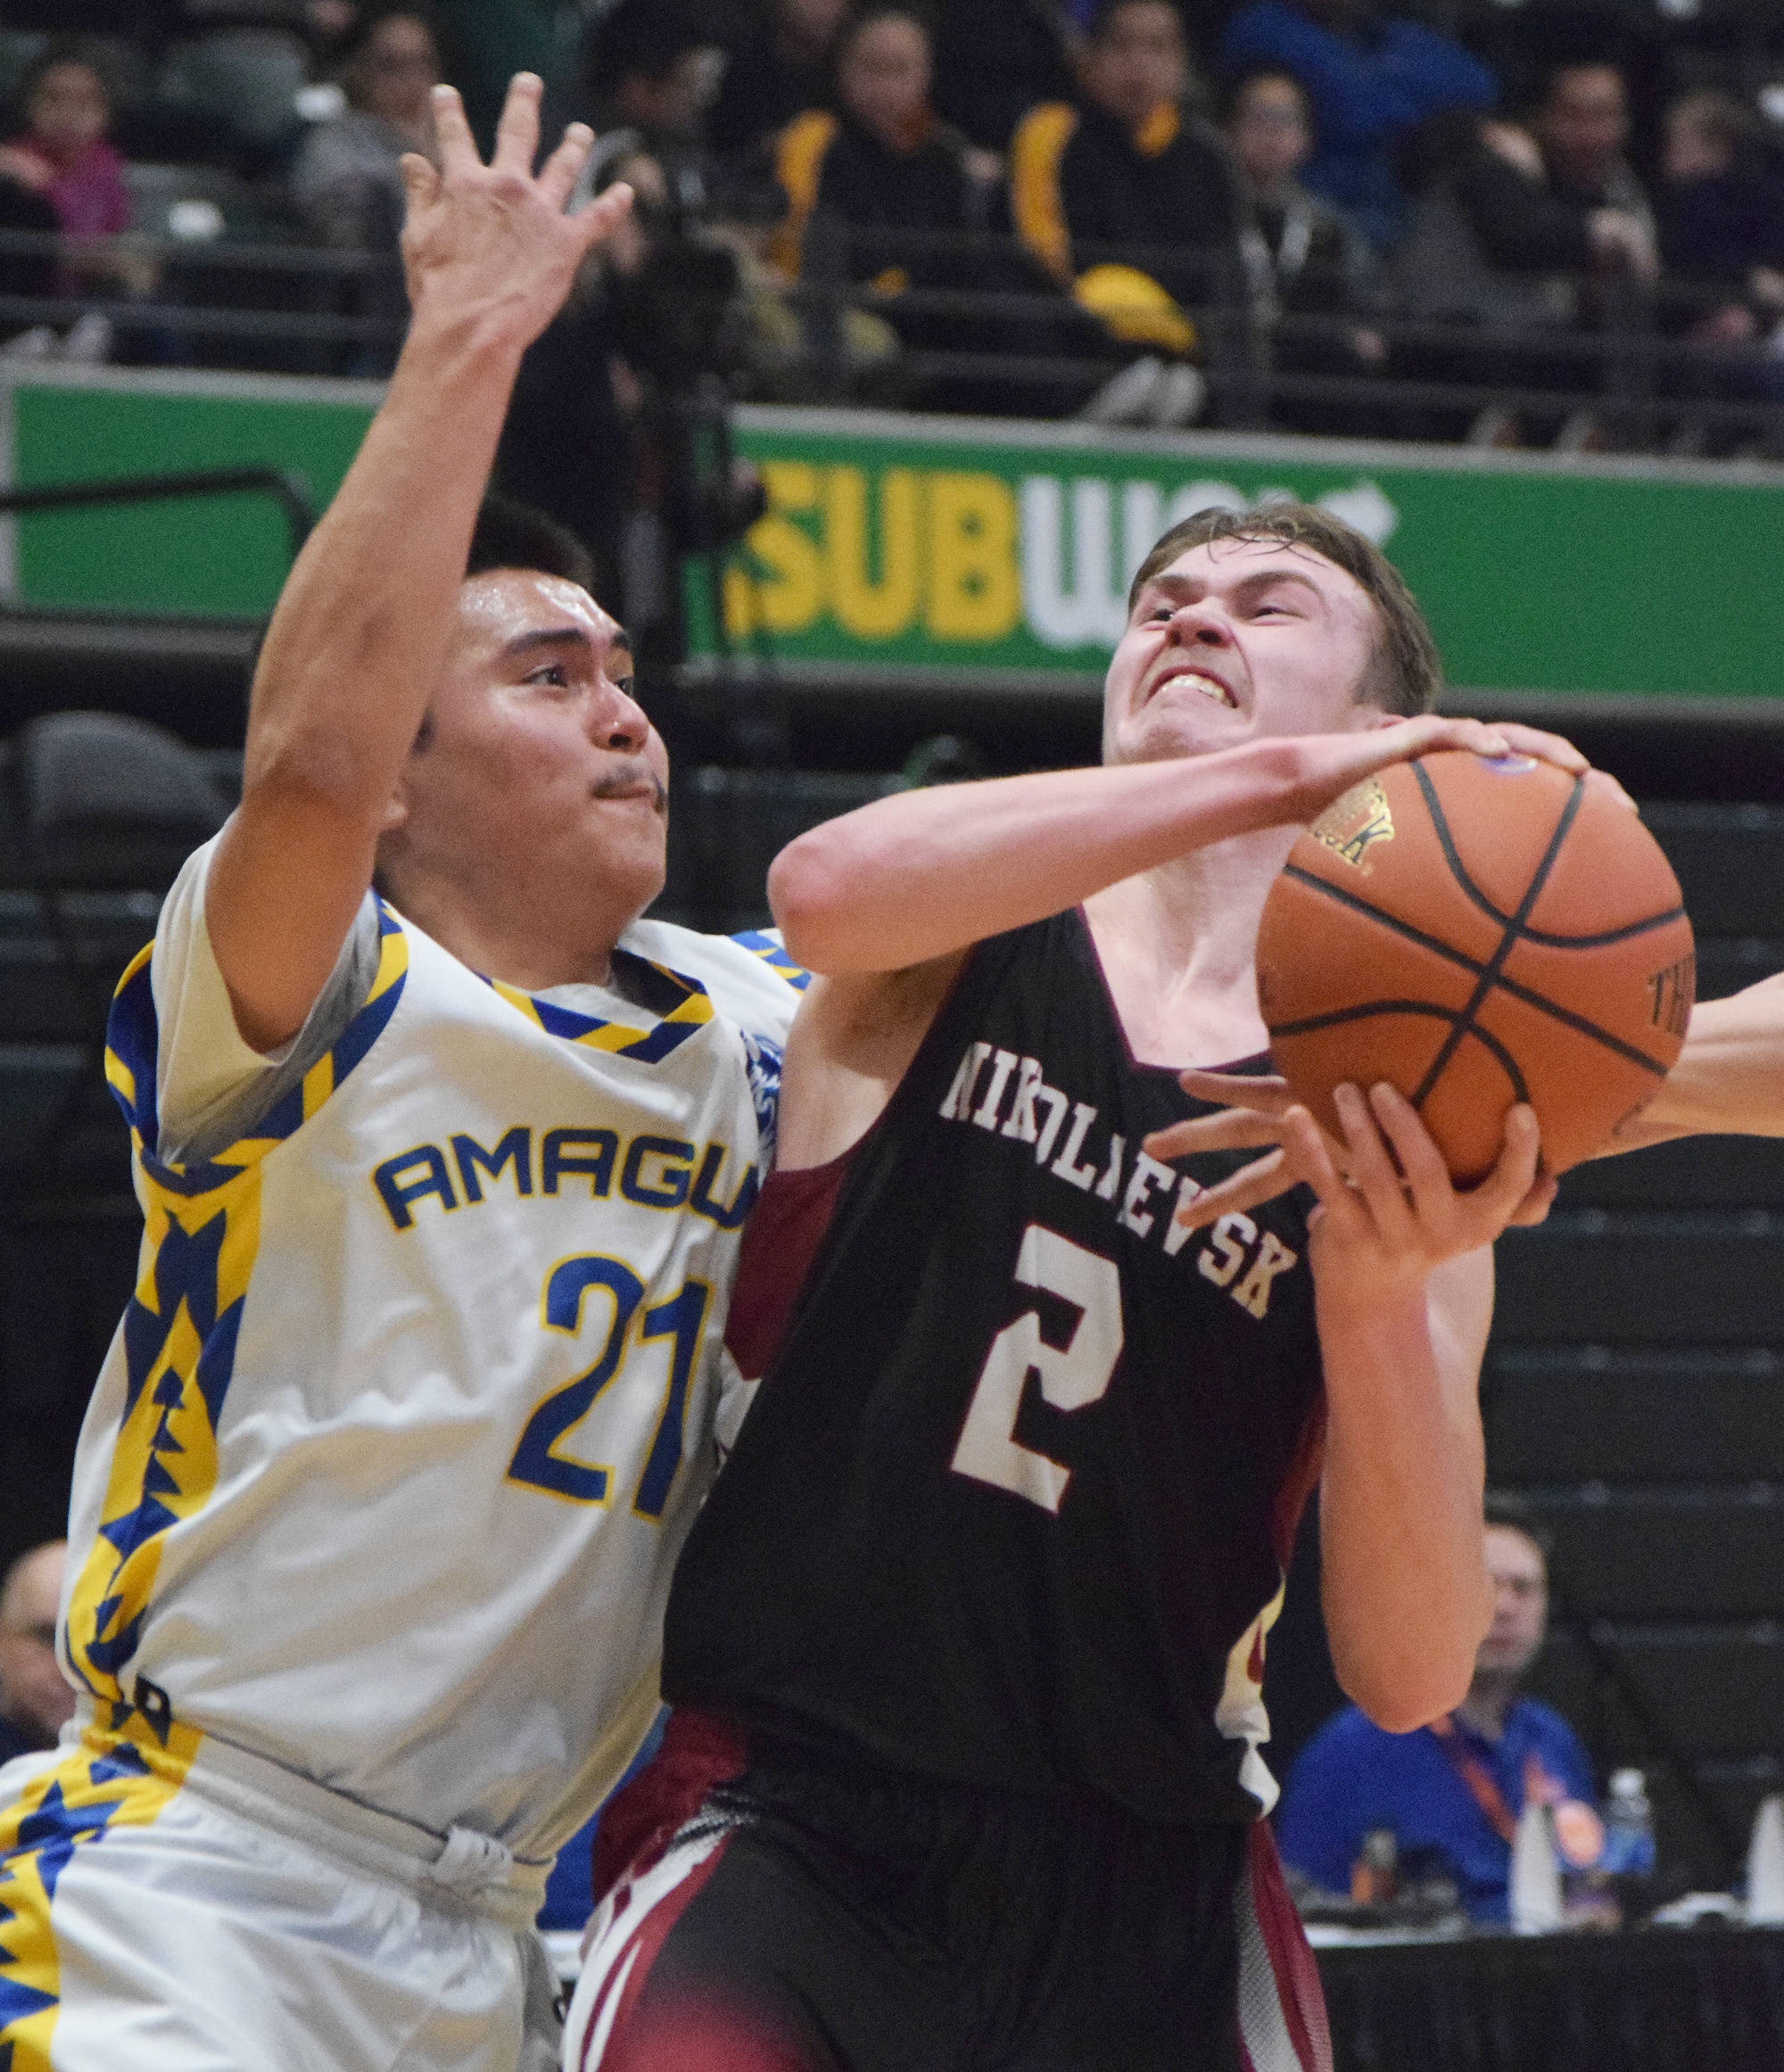 Nikolaevsk’s Kalenik Molodih drives to the rim against Nunamiut’s Dyrell Lincoln Thursday in a Class 1A state tournament quarterfinal at the Alaska Airlines Center in Anchorage. (Photo by Joey Klecka/Peninsula Clarion)